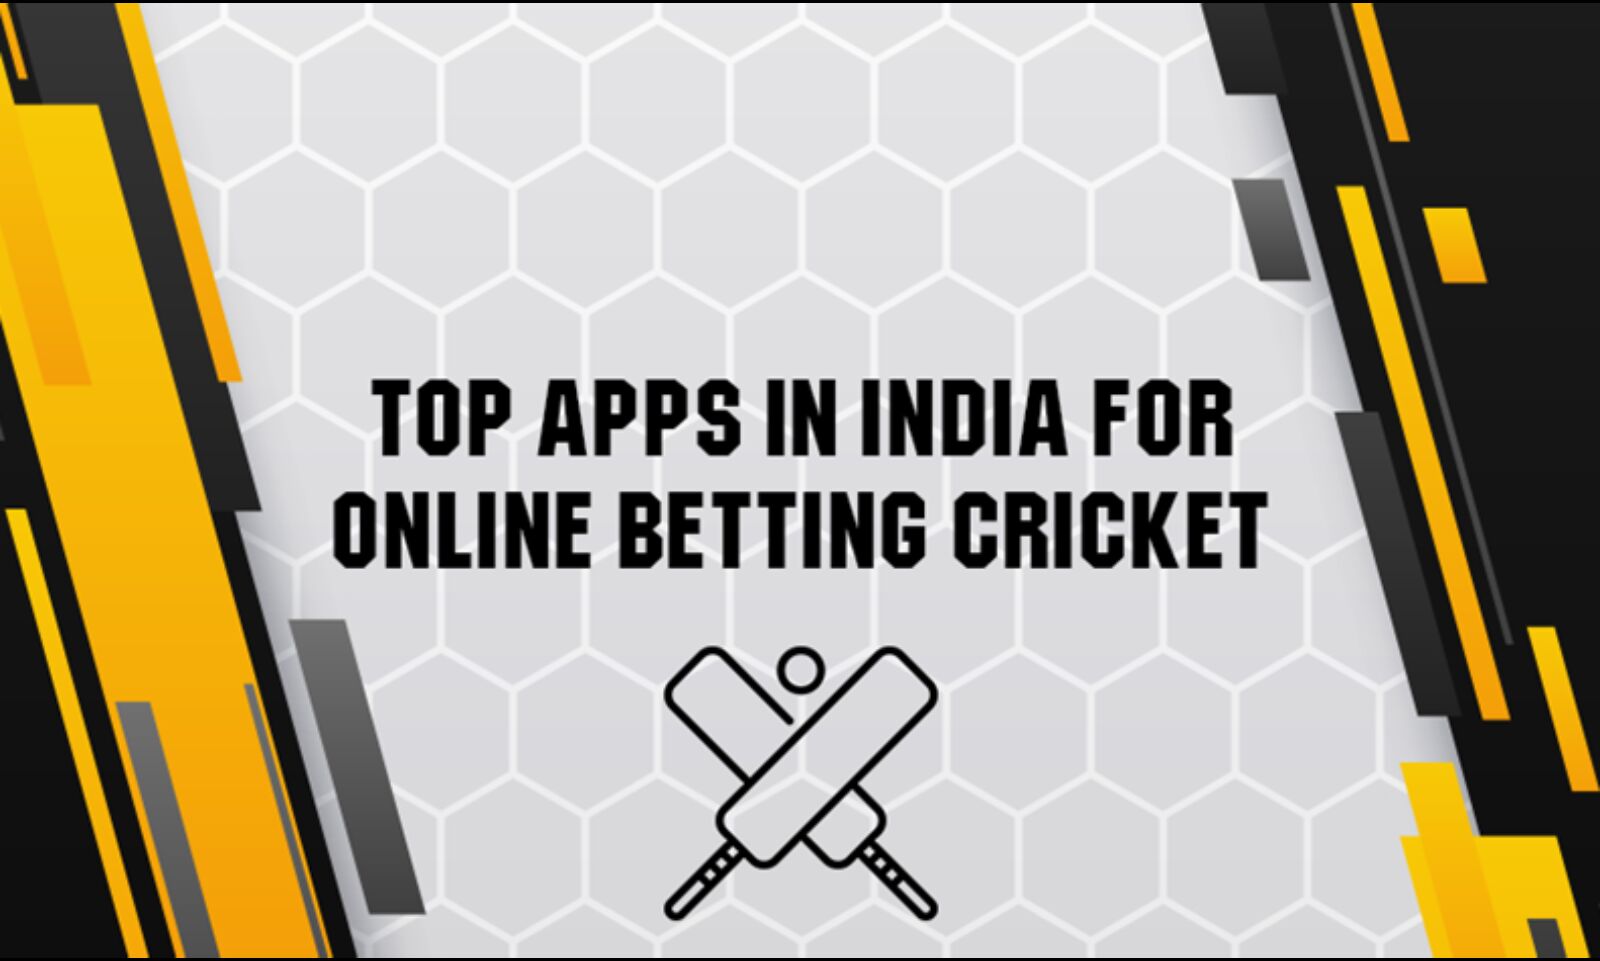 The Best 5 Examples Of Betting Apps India